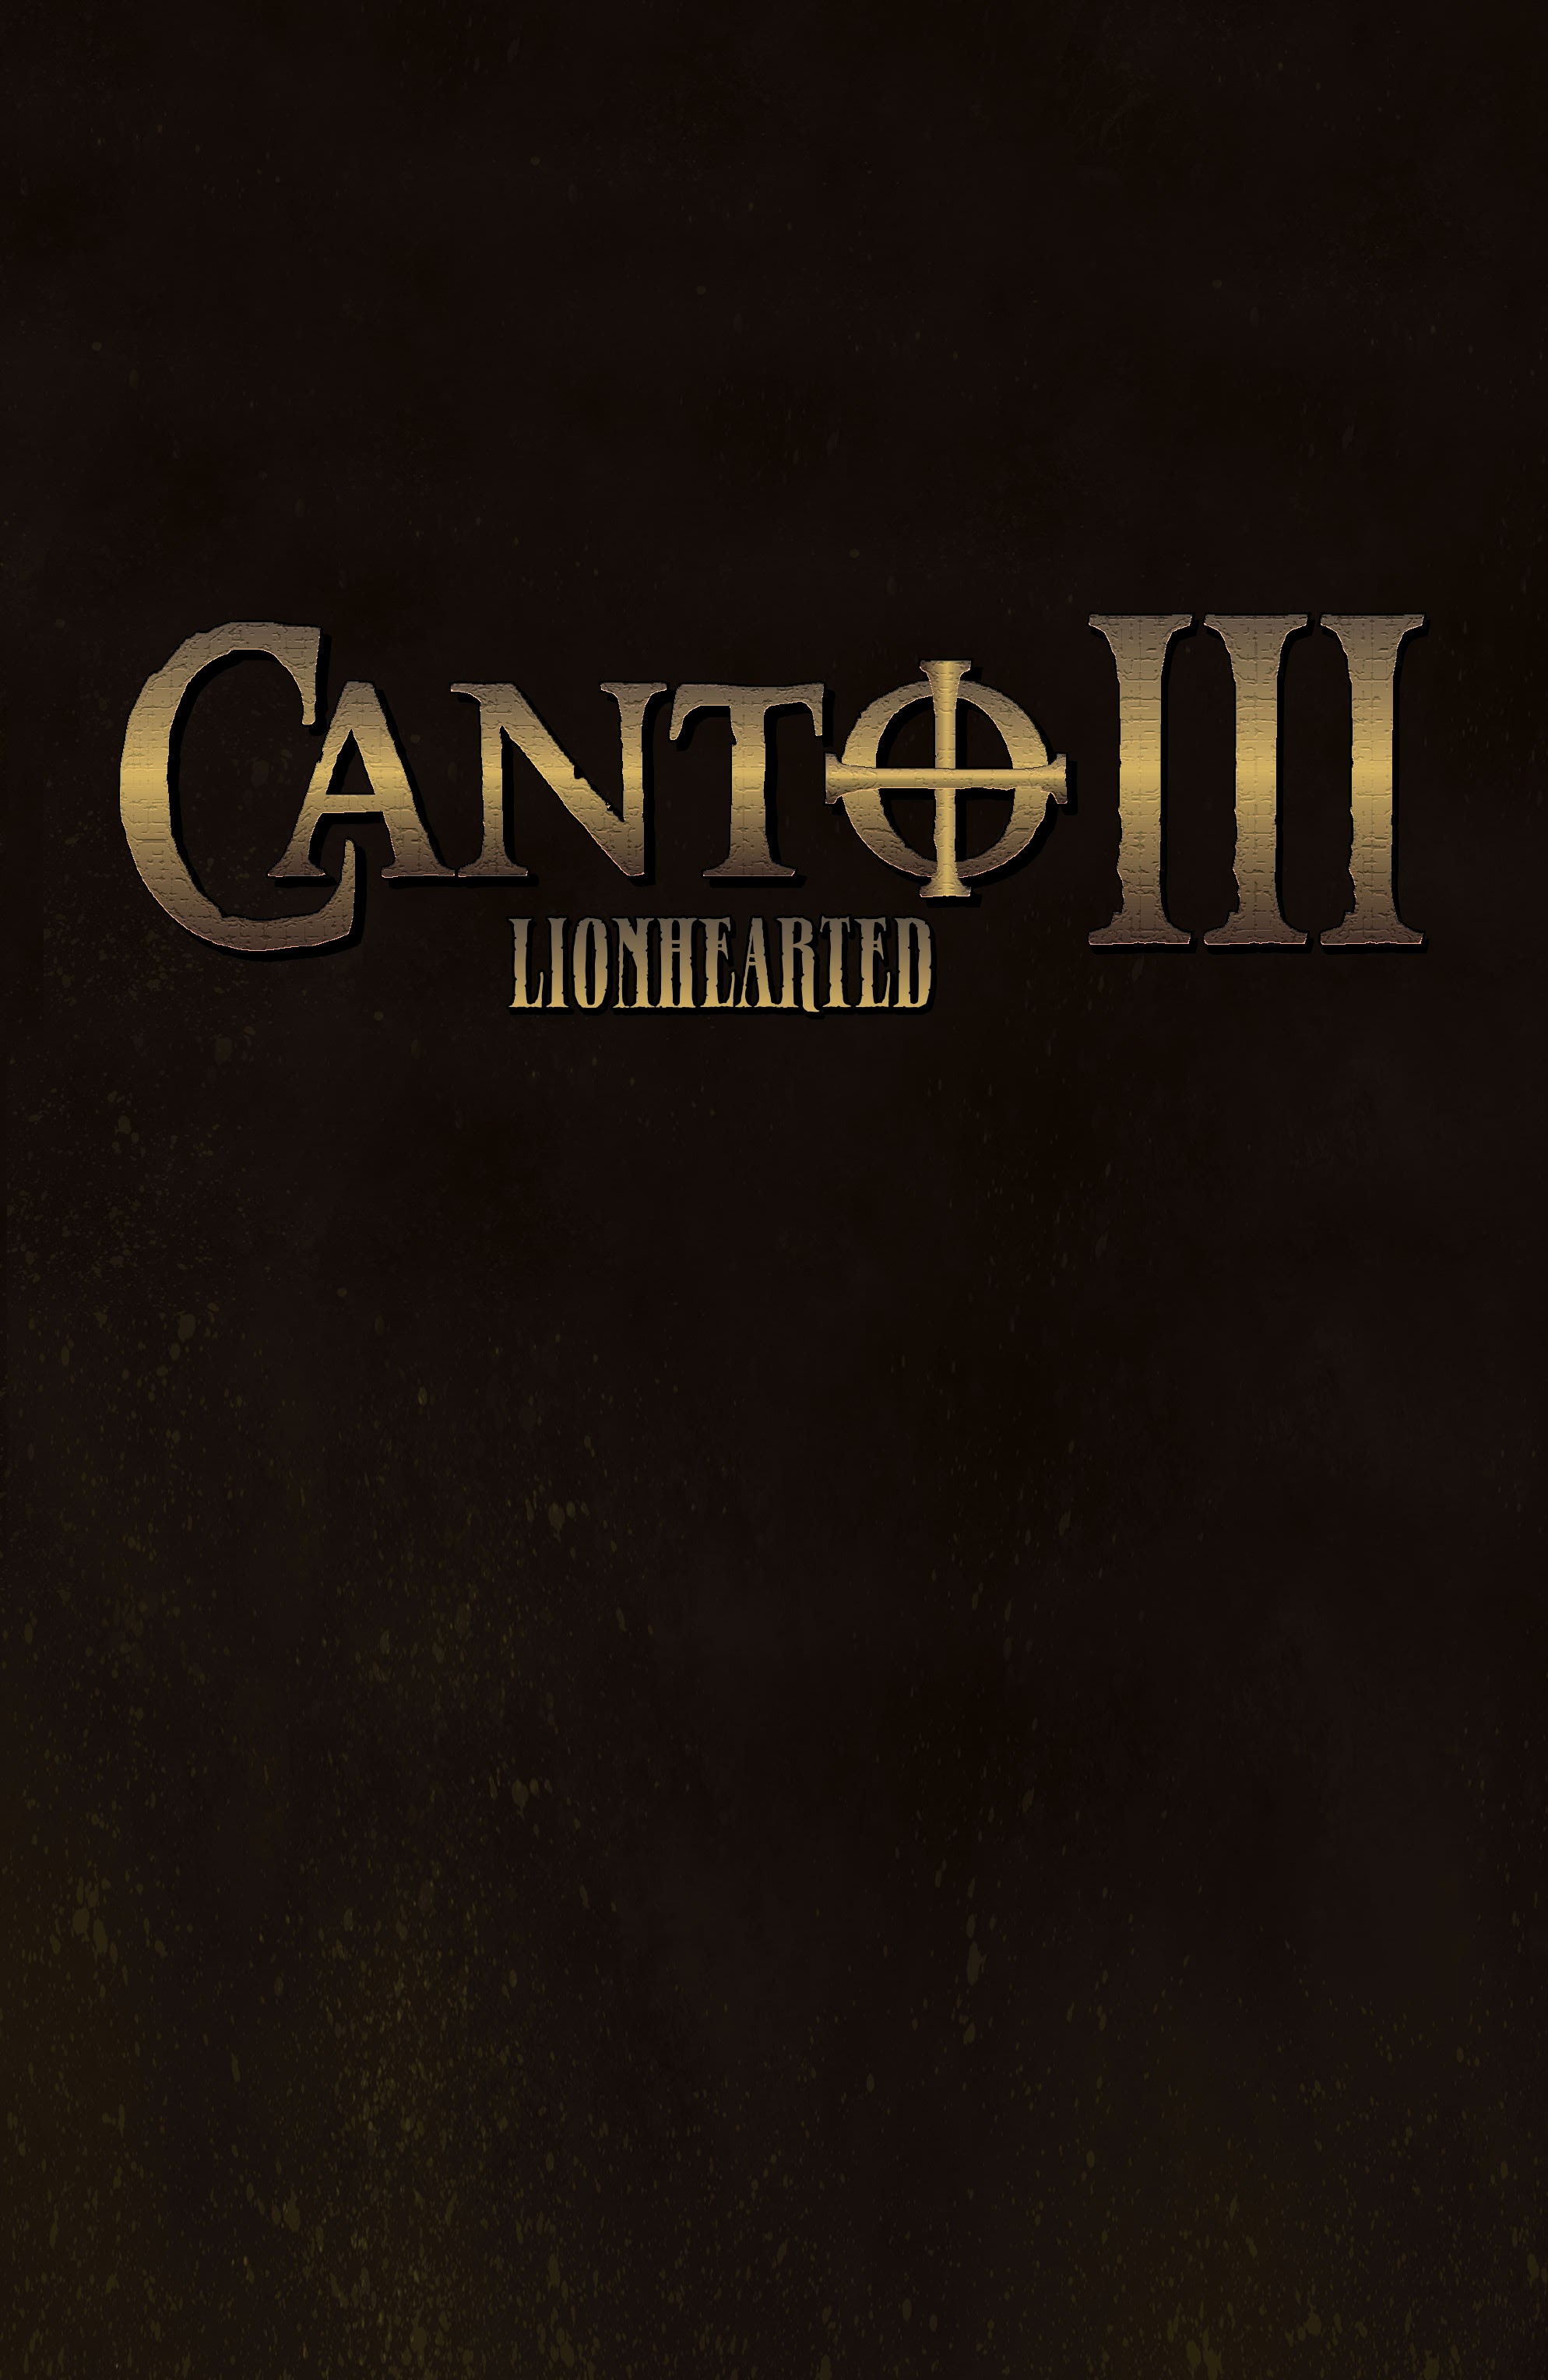 Read online Canto III: Lionhearted comic -  Issue #1 - 30